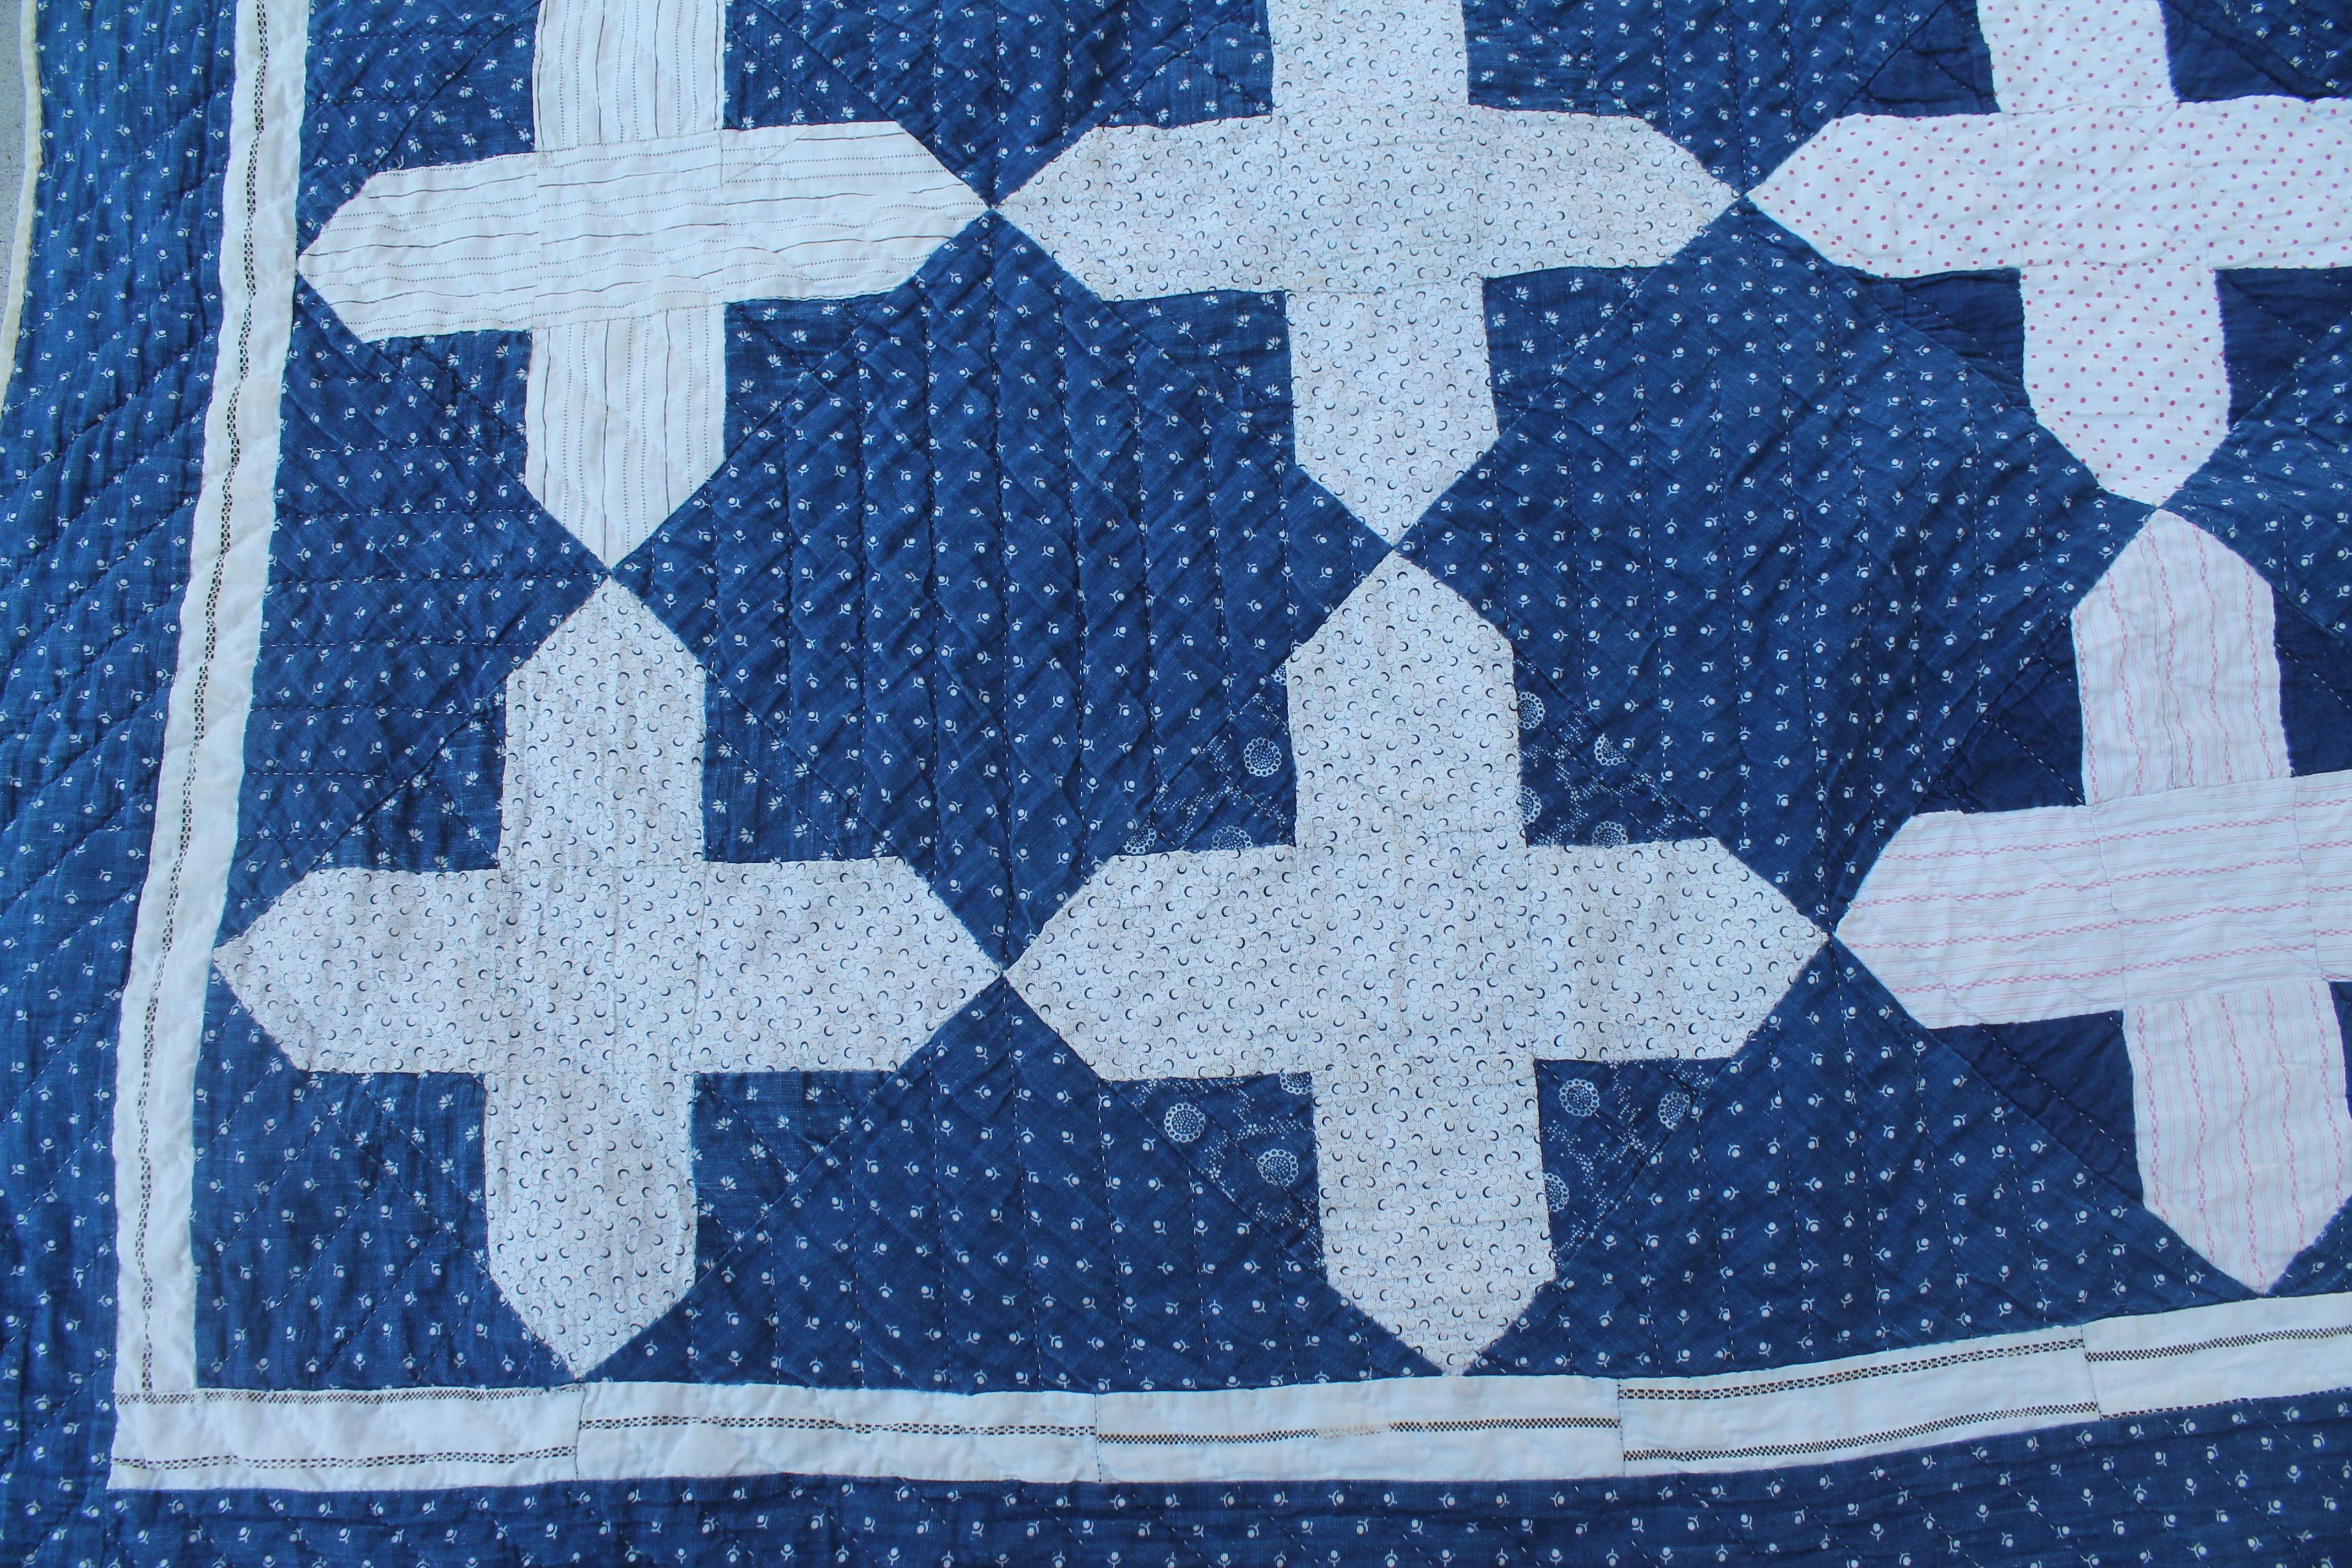 This fine early blue and white calico is super cool and in fine condition. The white fabric is early 19th century shirting and in pristine condition. These early quilts are very hard to find in pristine condition.